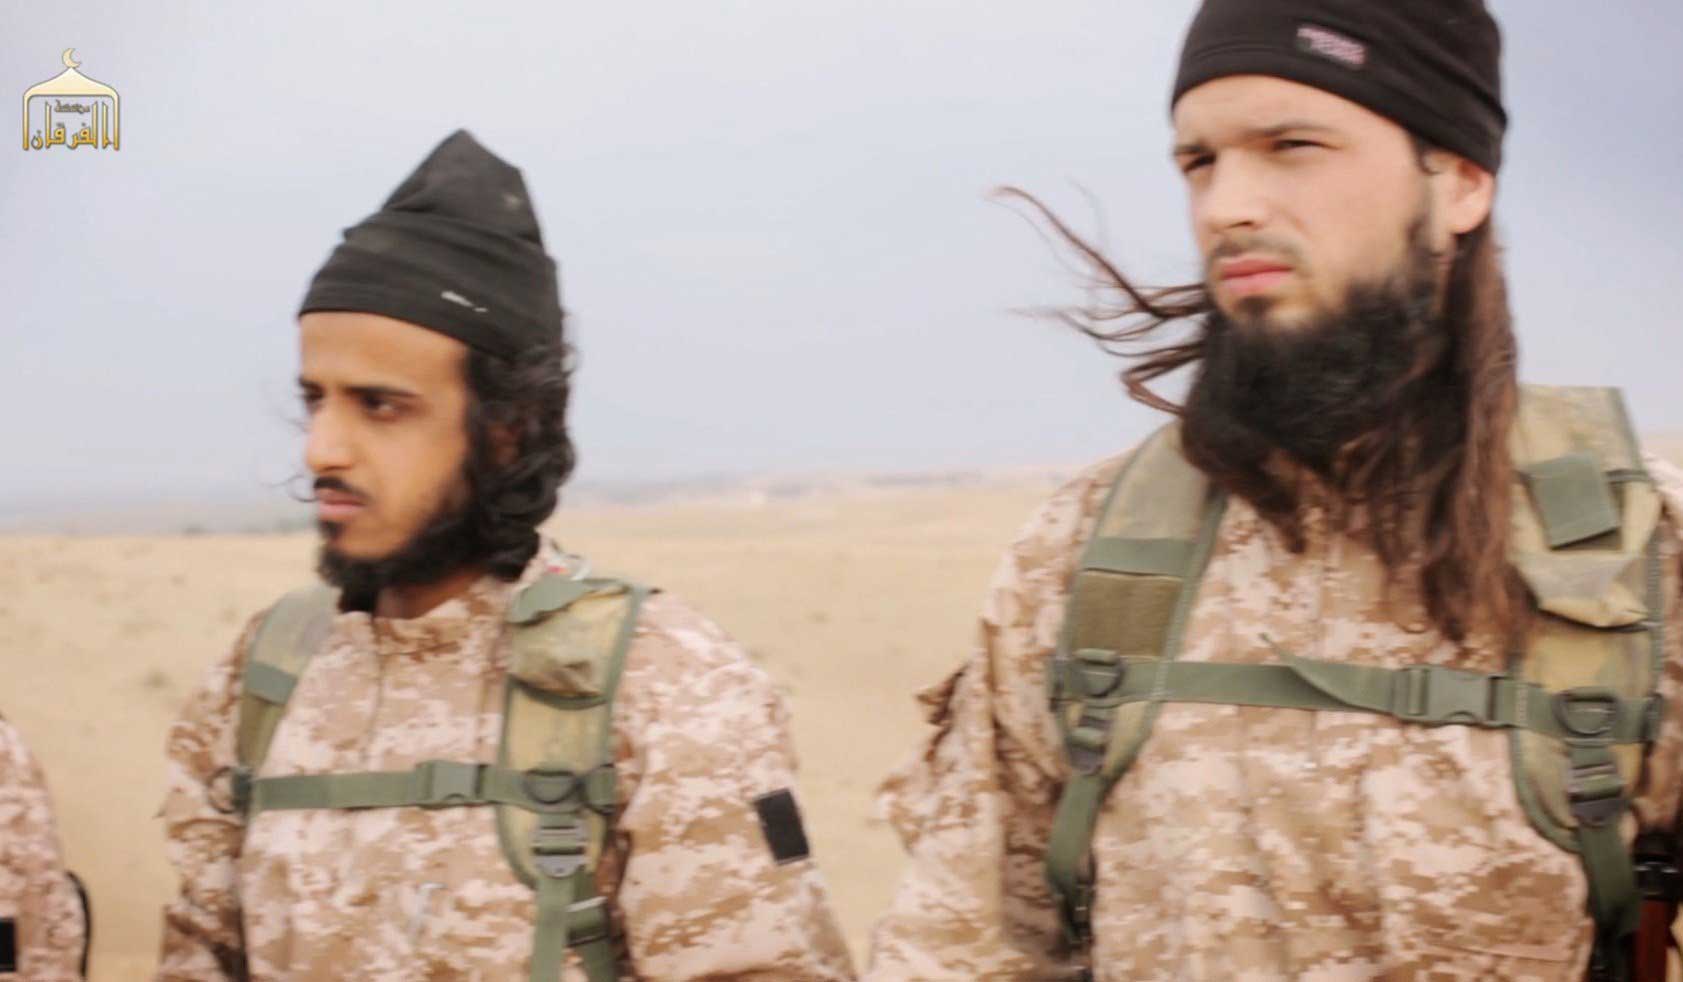 A frame grab from a propaganda video released on Nov. 16, 2014 shows members of The Islamic State in Iraq and Syria, with among them French citizen Maxime Hauchard, before taking part in the beheadings of Syrian soldiers. (AFP/Getty Images)